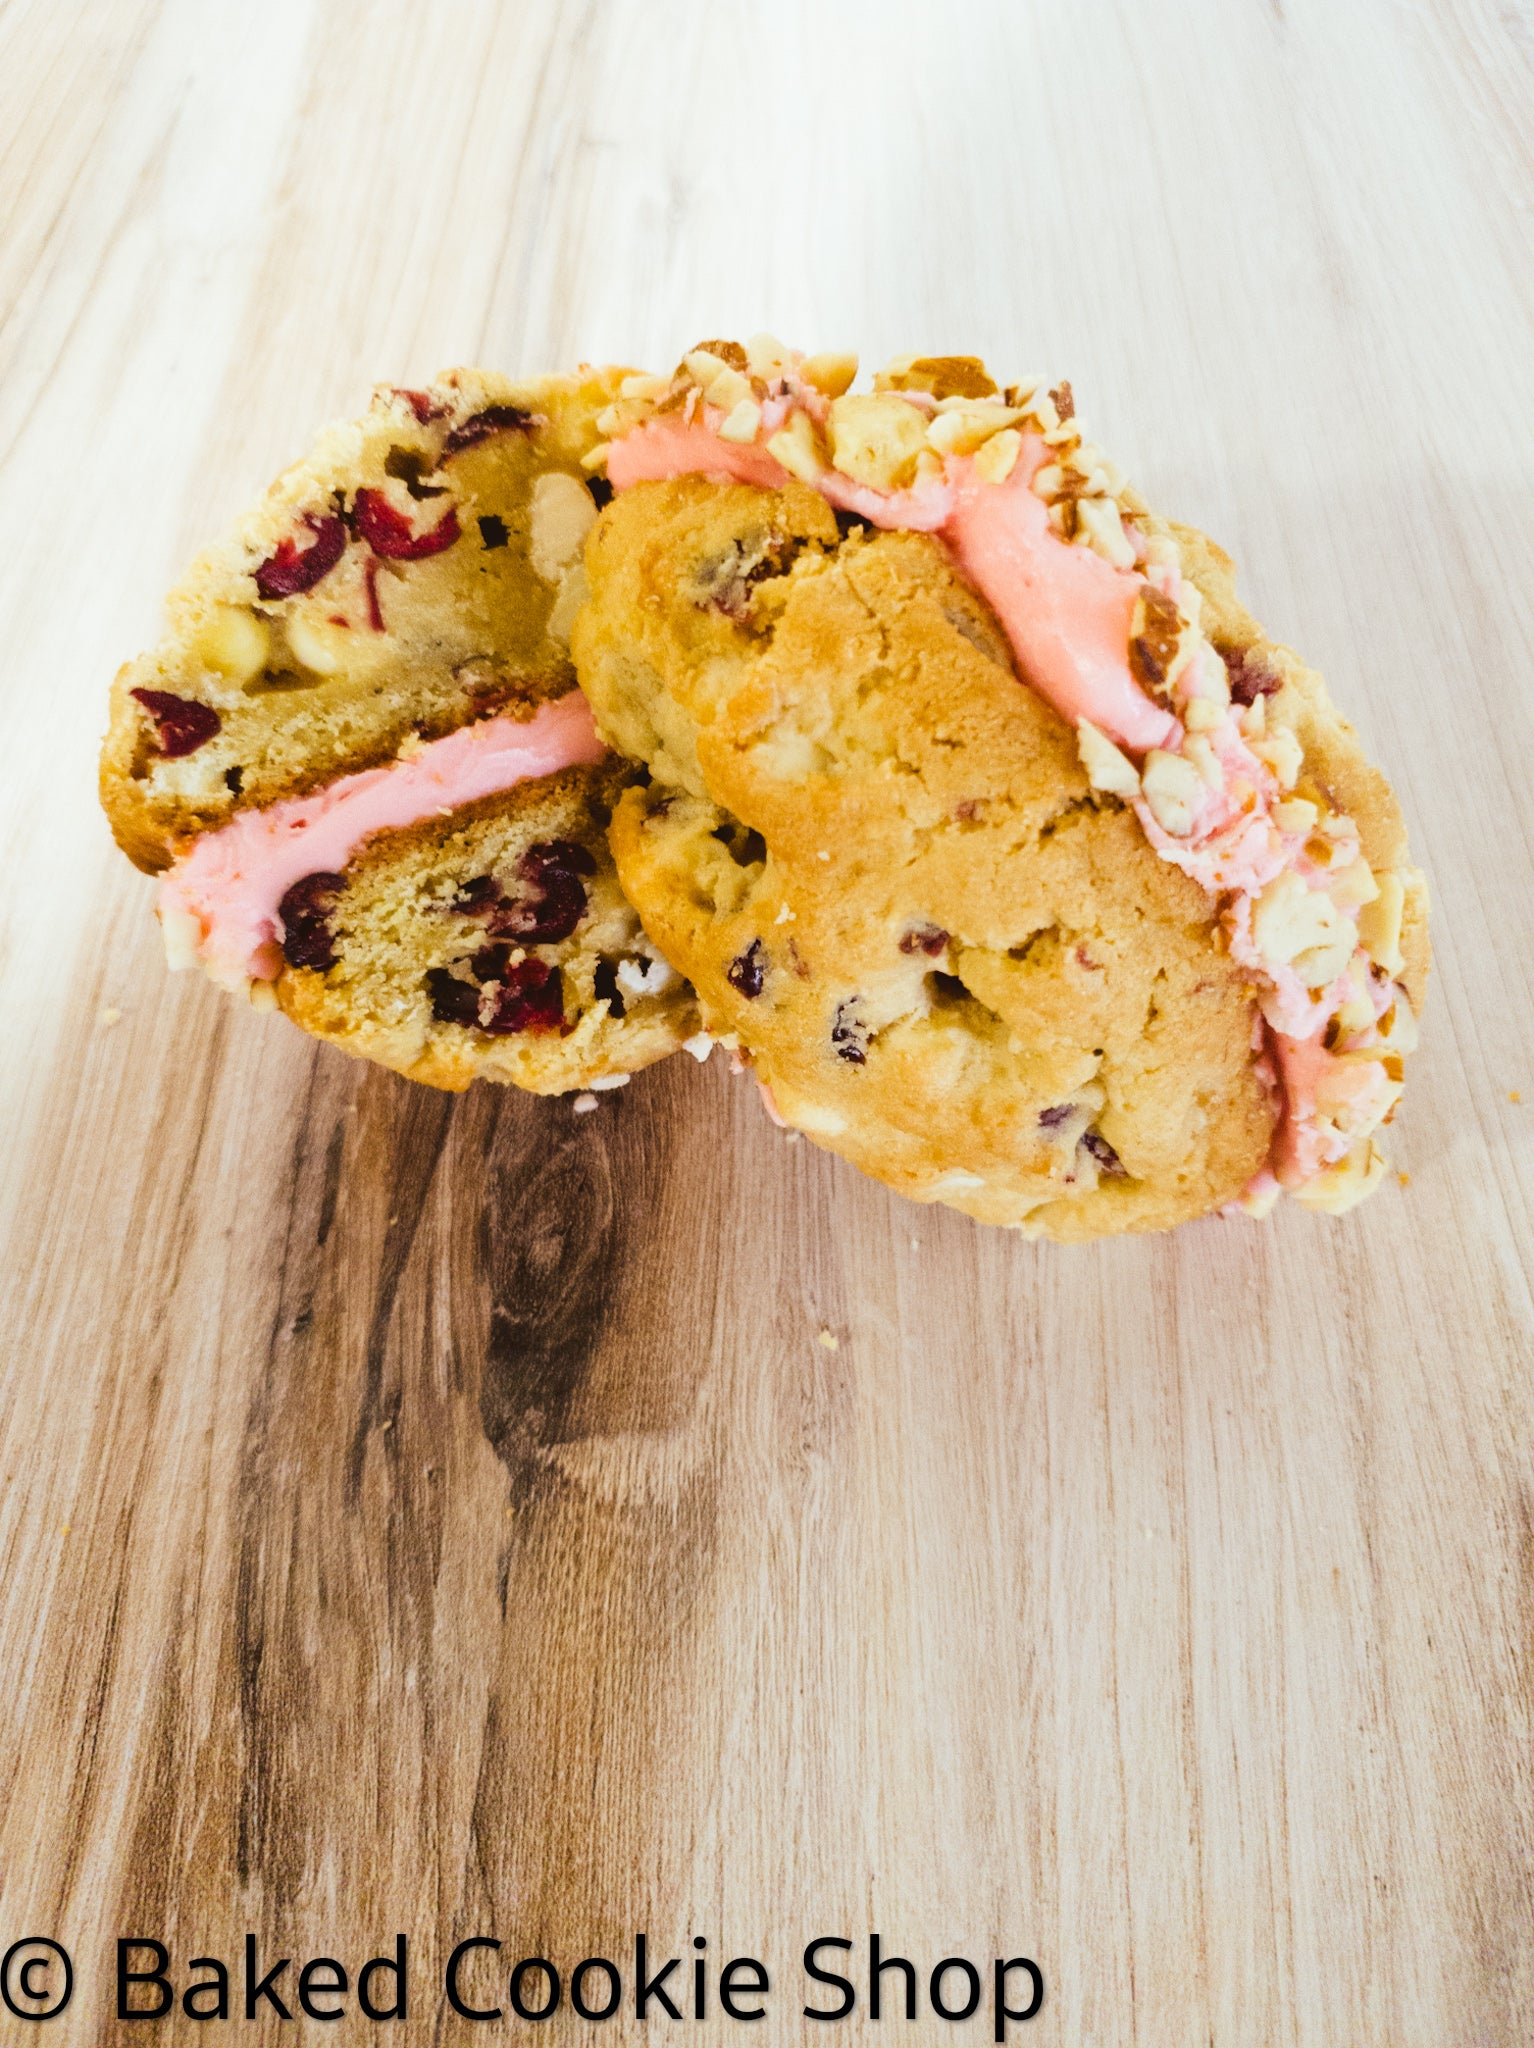 Gourmet White Chocolate Cranberry Cookie